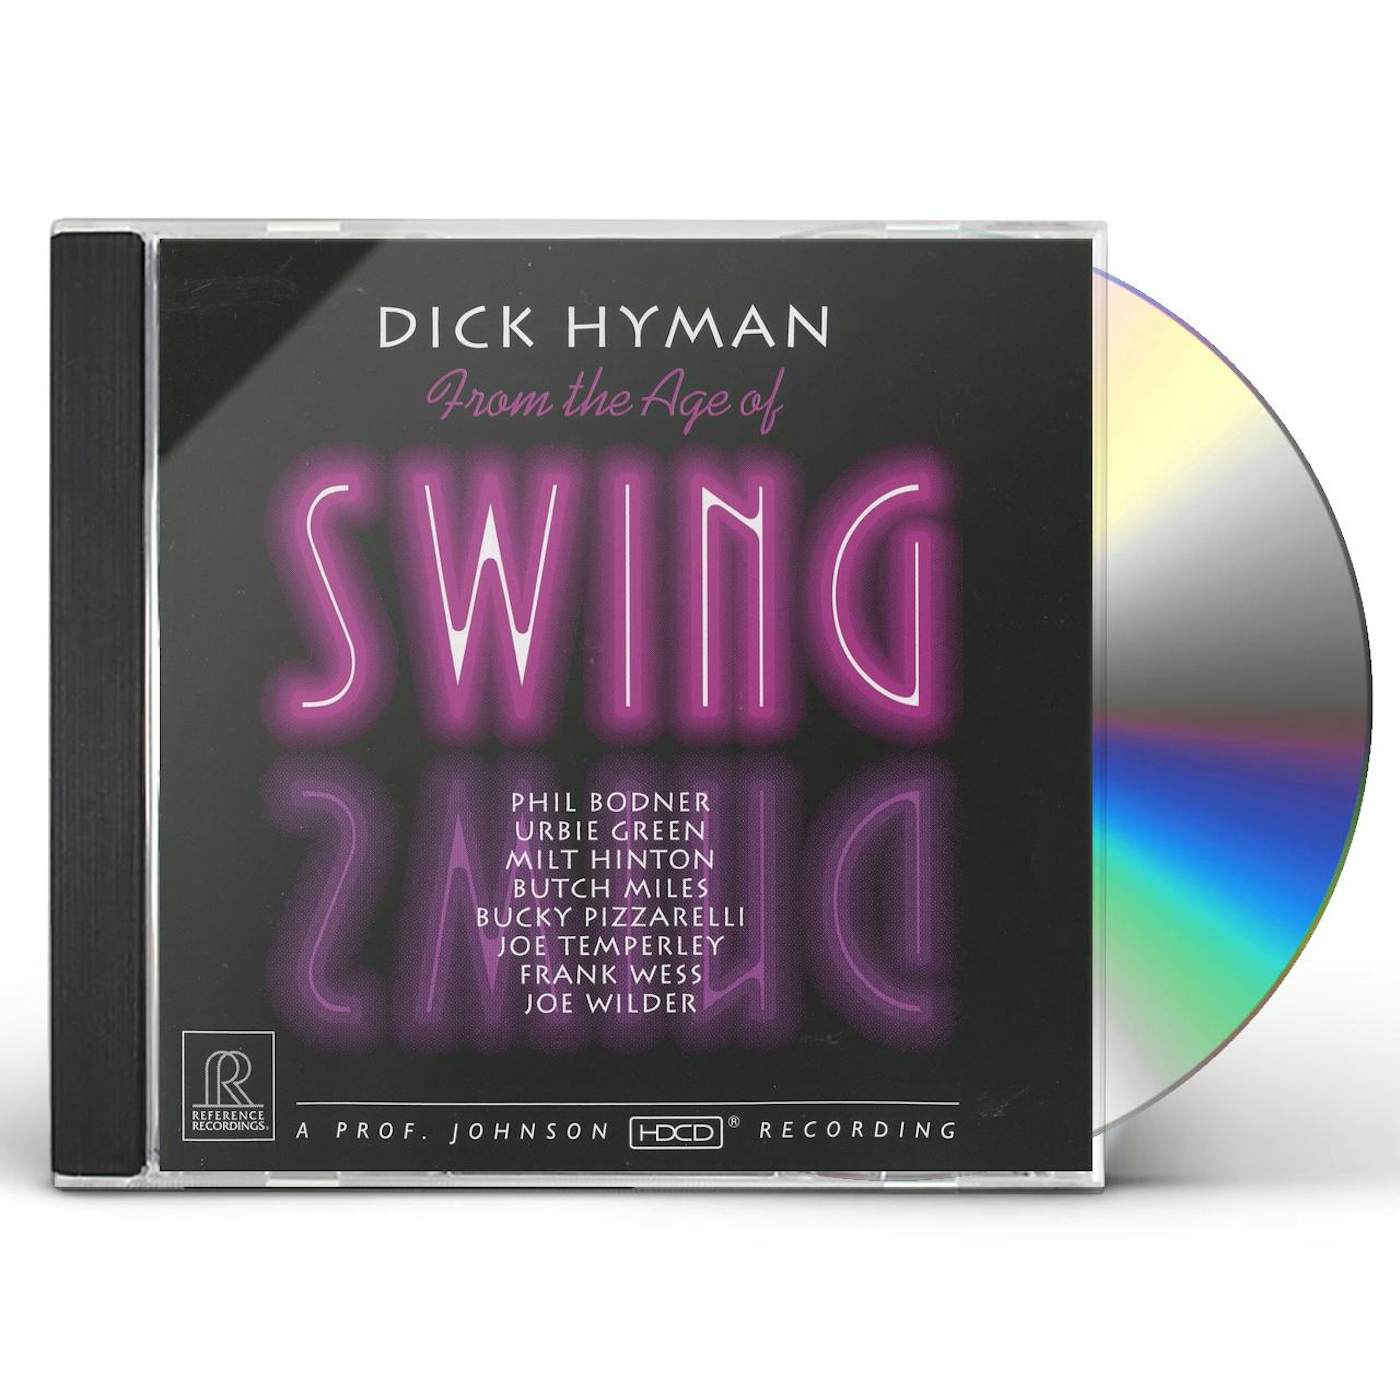 Dick Hyman FROM THE AGE OF SWING CD